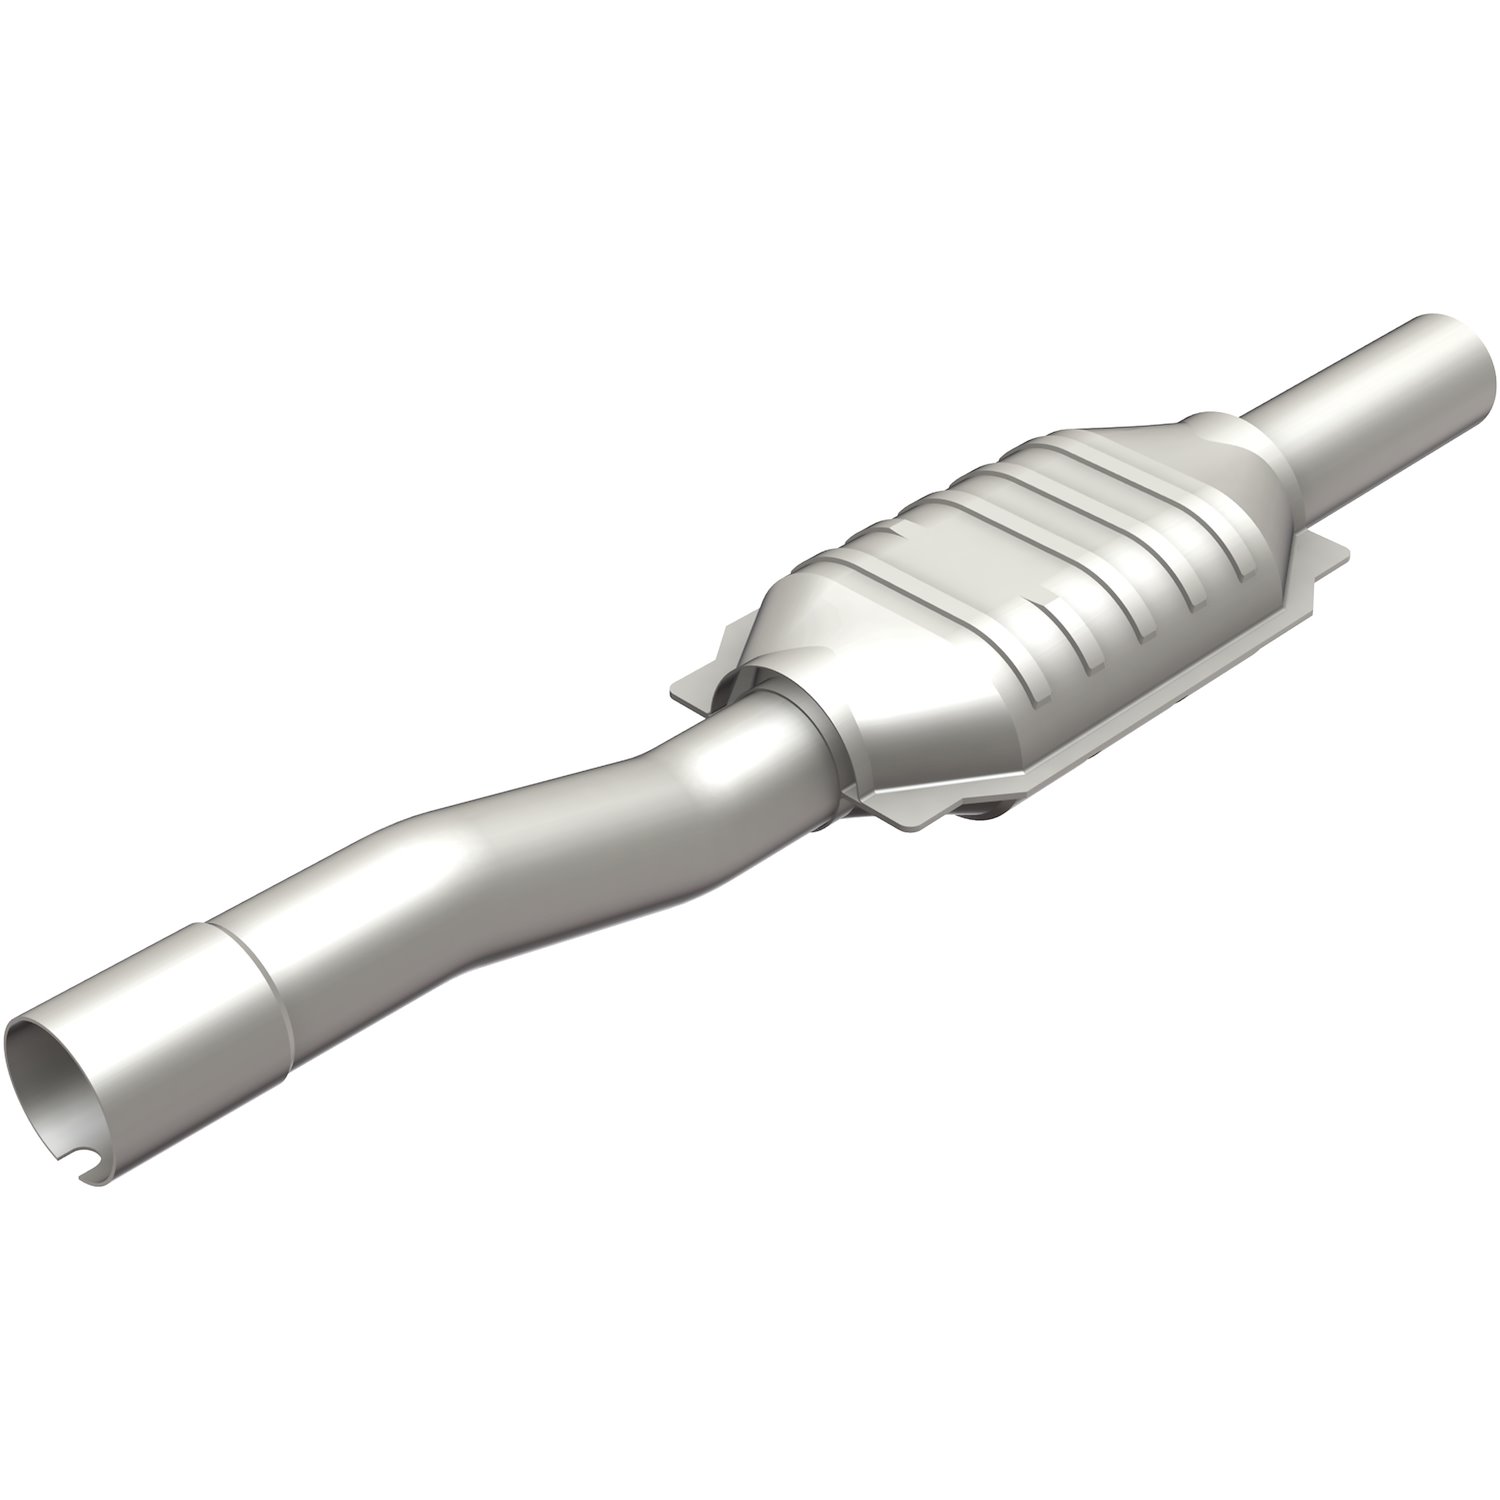 2002-2004 Jeep Grand Cherokee OEM Grade Federal / EPA Compliant Direct-Fit Catalytic Converter